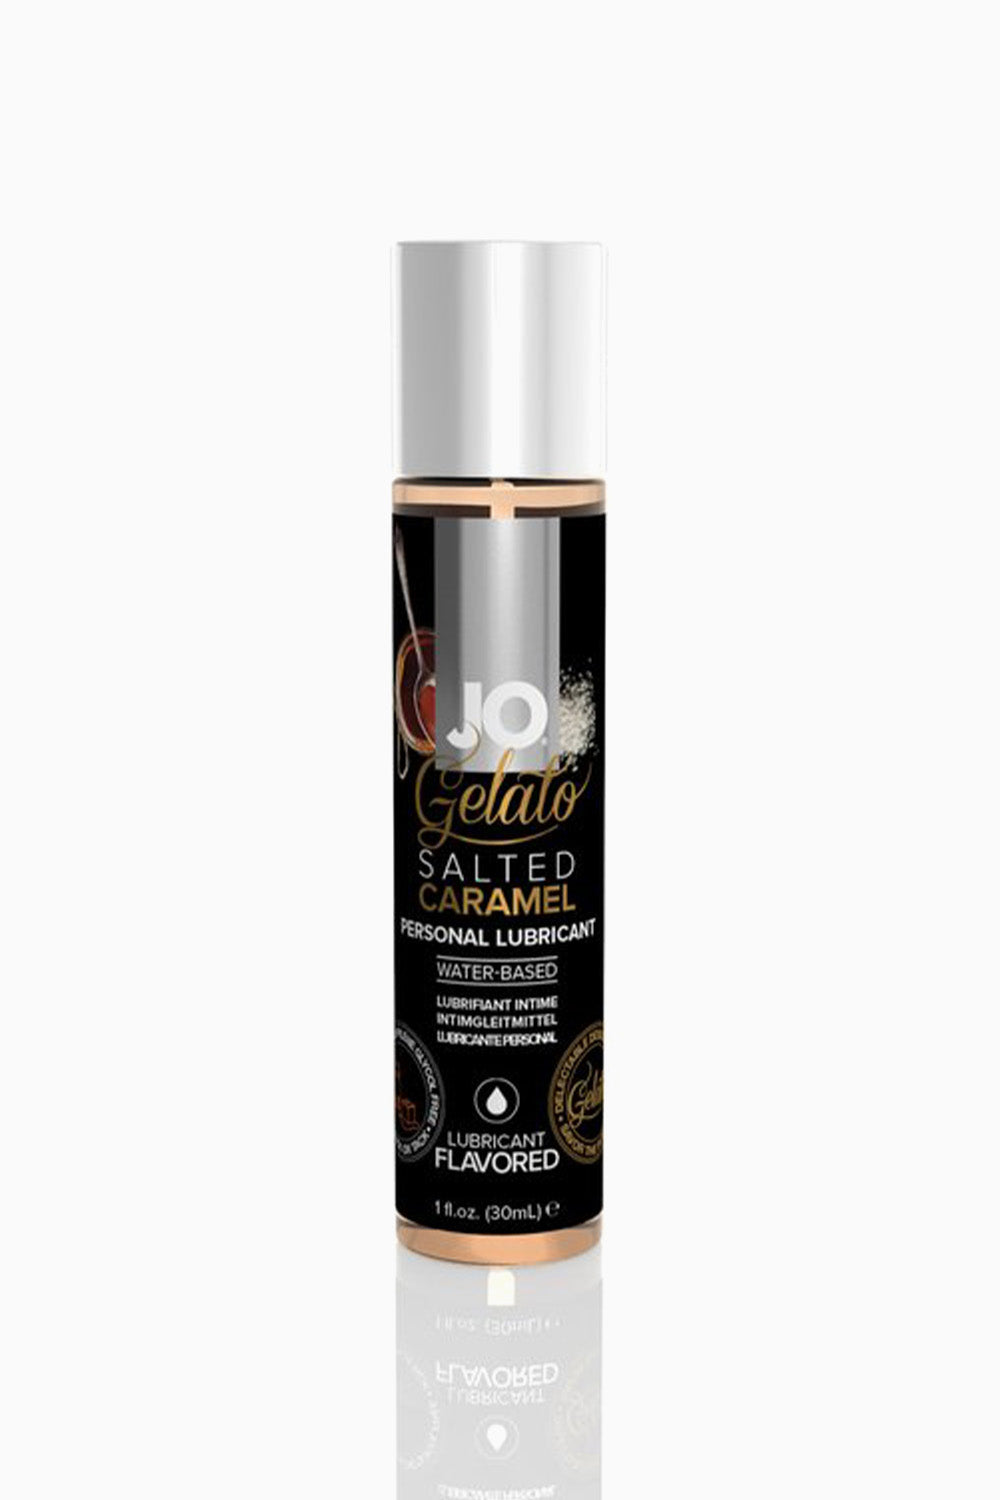 System JO Gelato Salted Caramel Water Based Lubricant